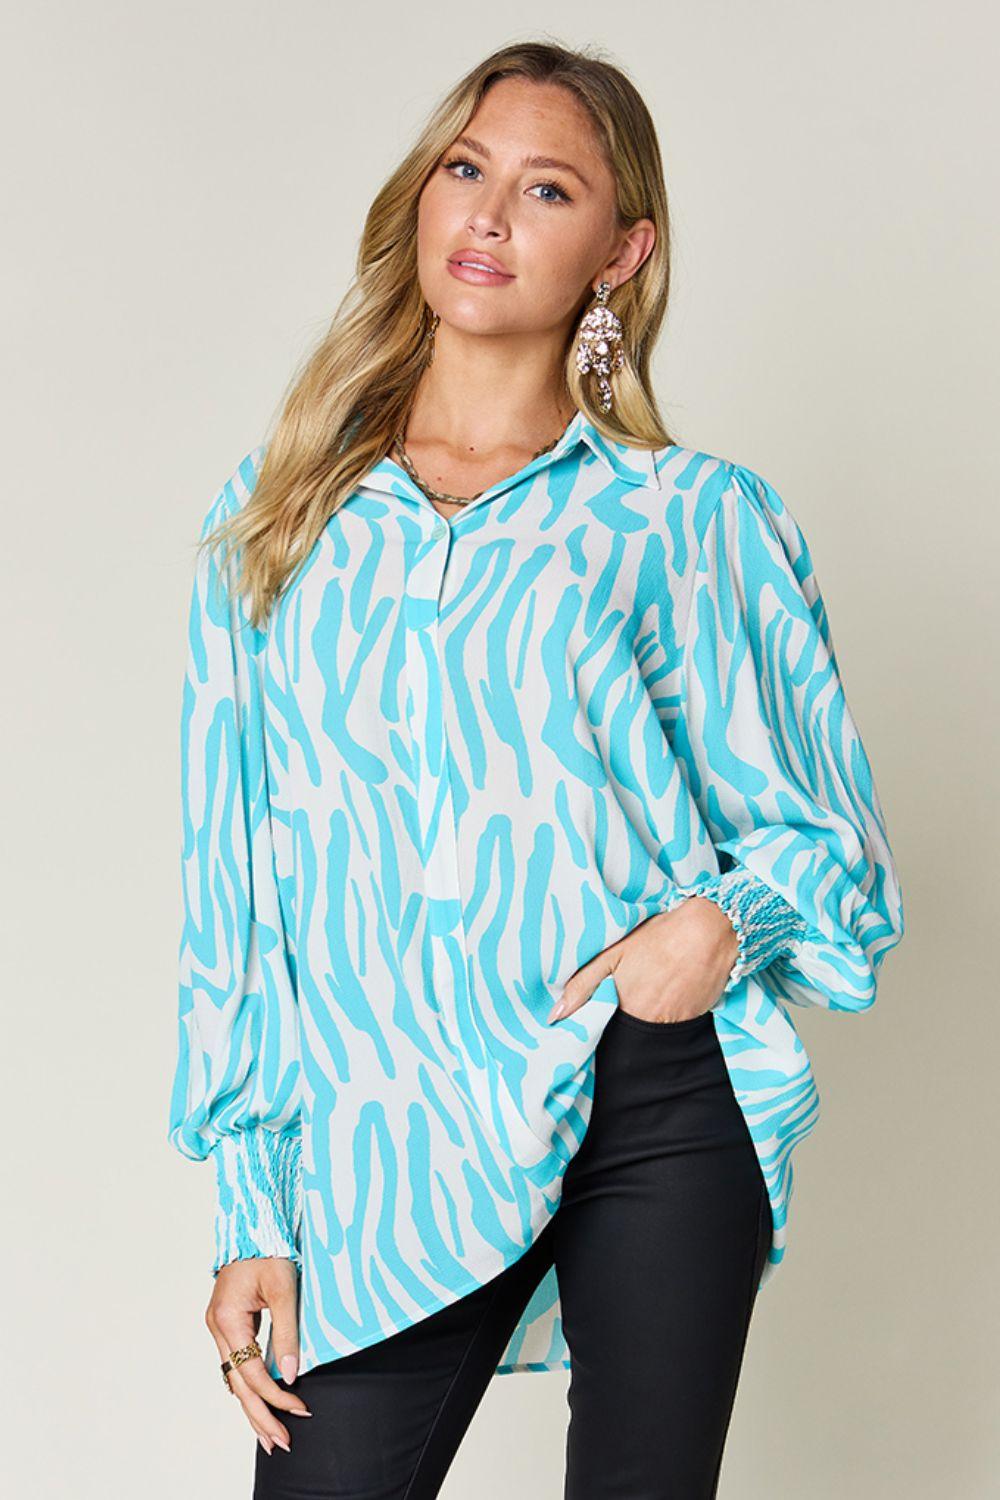 Double Take Full Size Printed Smocked Long Sleeve Blouse Tiffany Blue Shirts & Tops